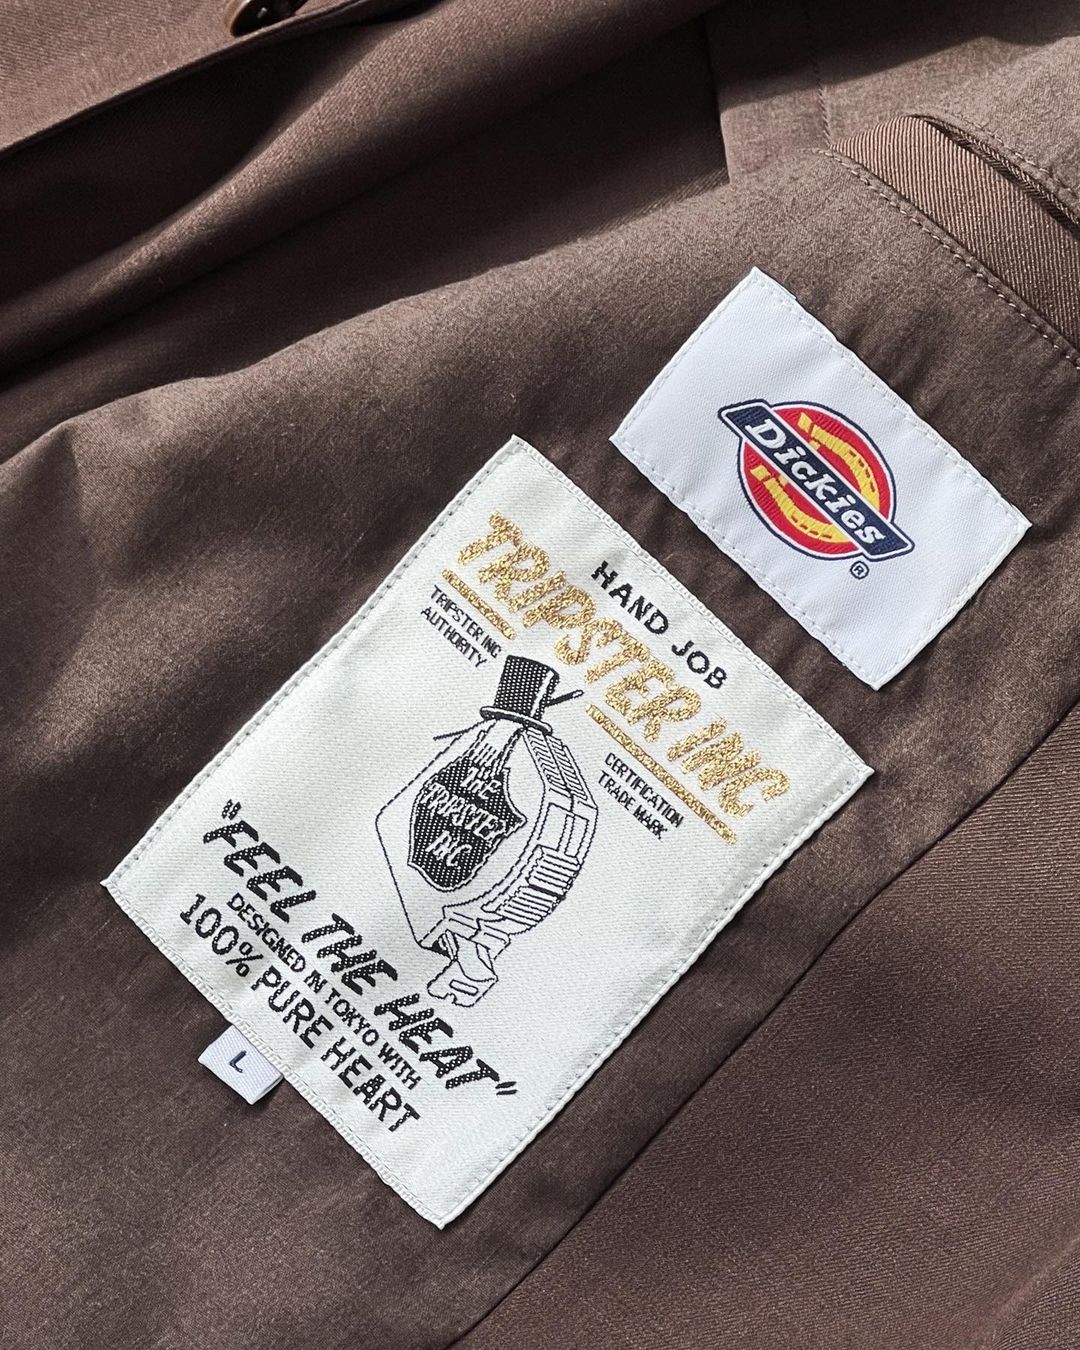 nomura-kunichi-tripster-dickies-suits-release-20230204